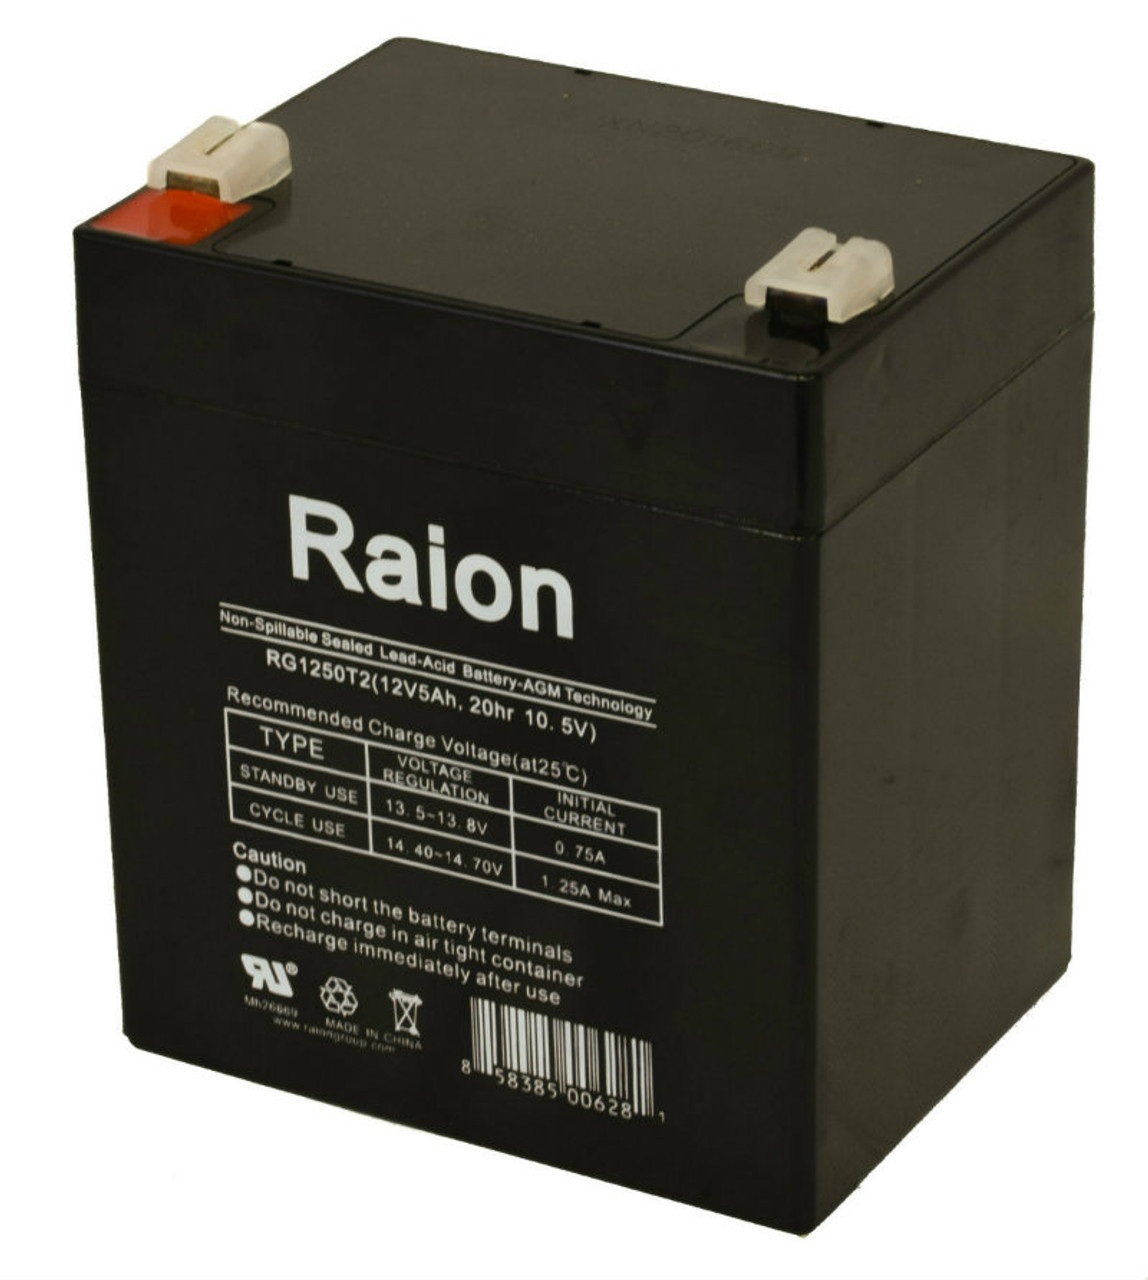 Raion Power RG1250T1 Replacement Emergency Light Battery for Exide 1000K